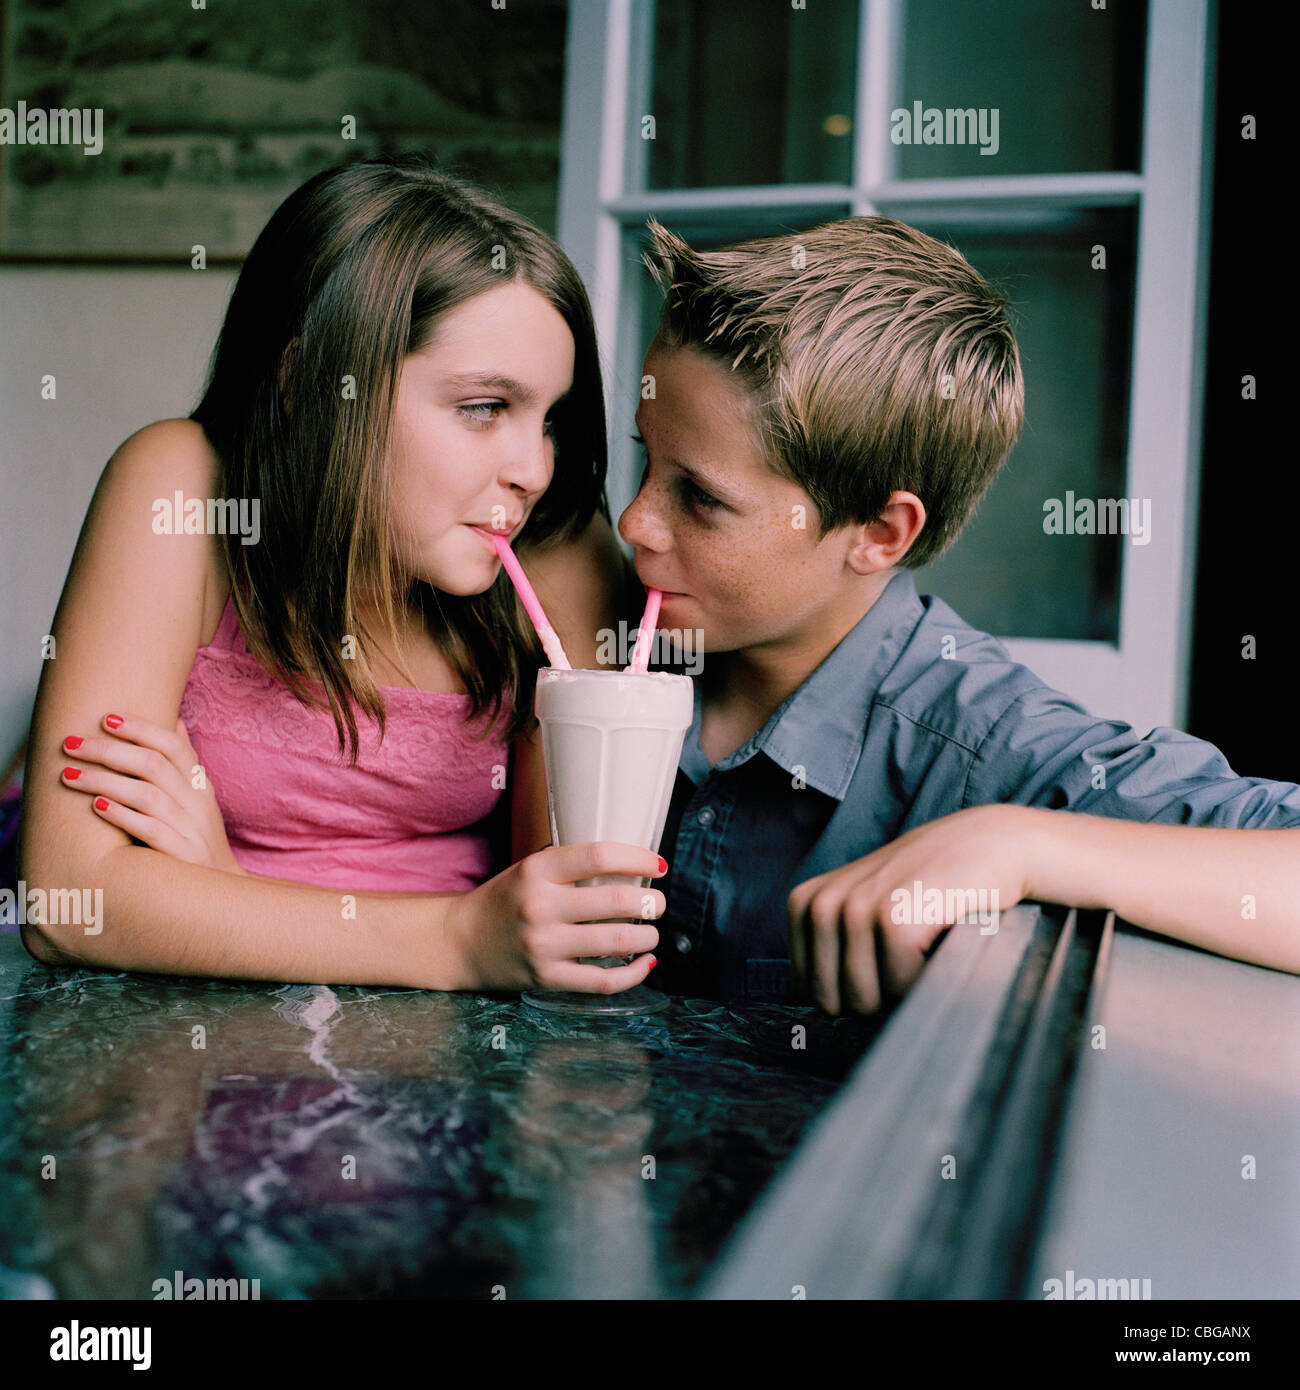 A Young Teenage Couple Sharing A Milkshake At A D